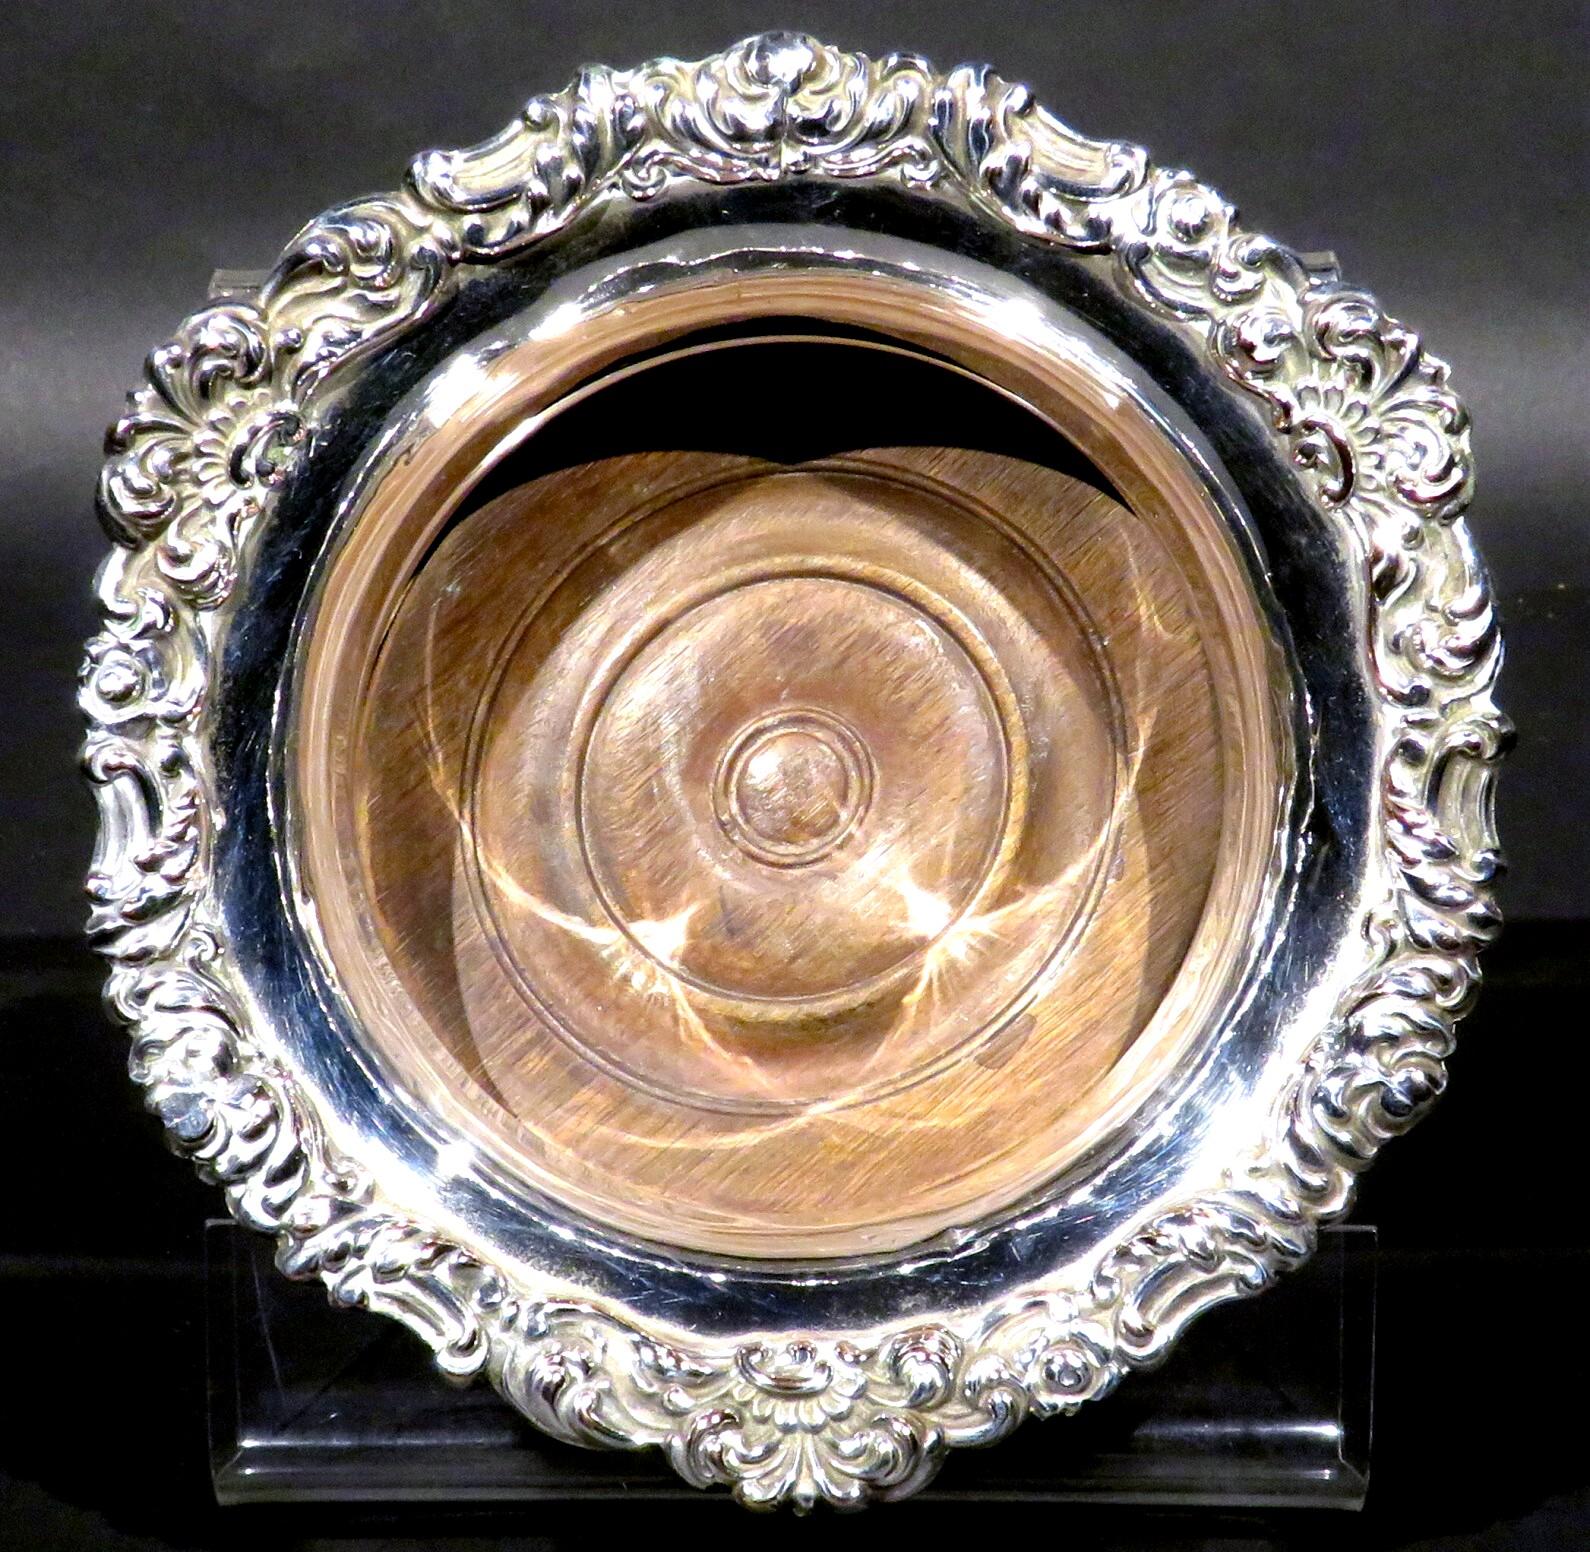 A Mid 19th Century Silver Plated Spirit Decanter Coaster, English Circa 1840 In Good Condition For Sale In Ottawa, Ontario